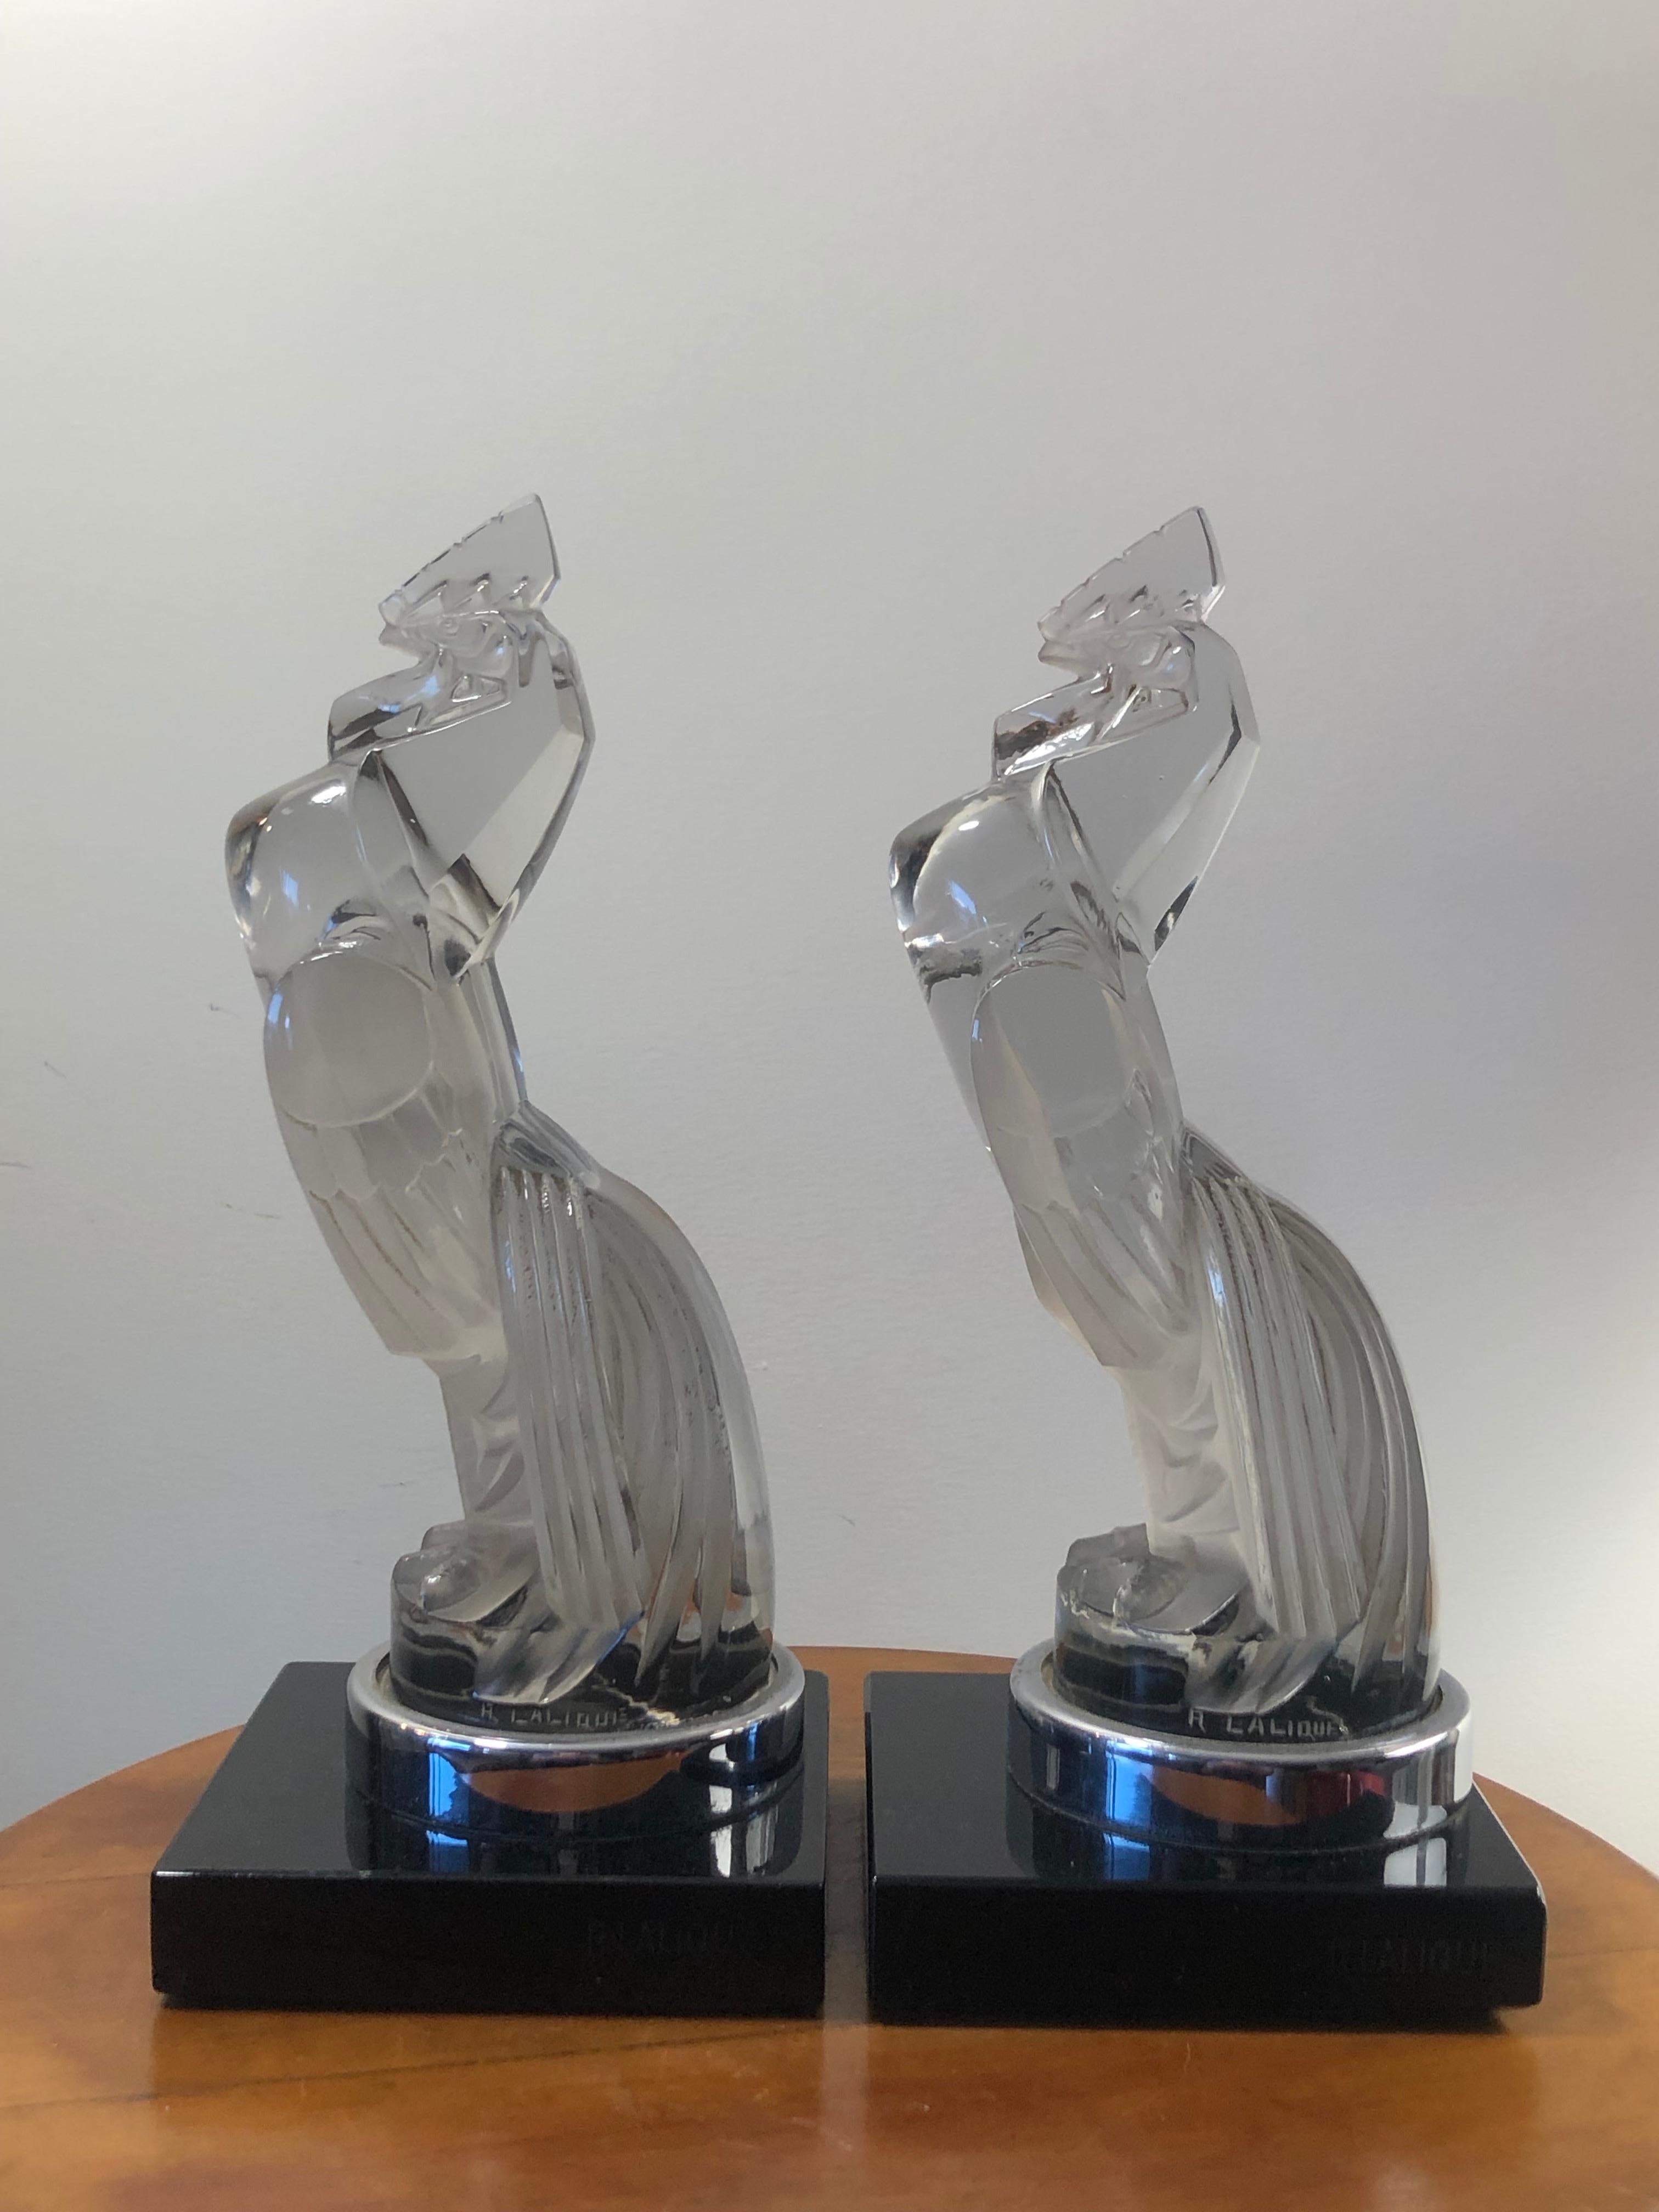 Molded 1929 Rene Lalique Pair of Coq Houdan Bookends on Black Glass Bases, Roosters